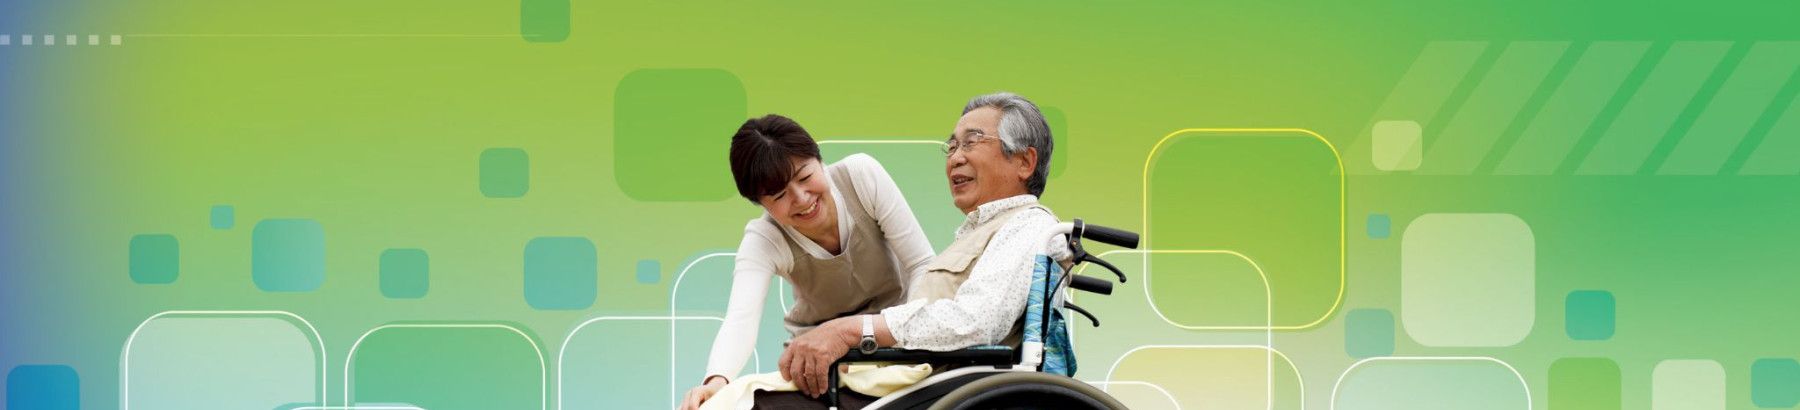 green background with person helping man in wheelchair